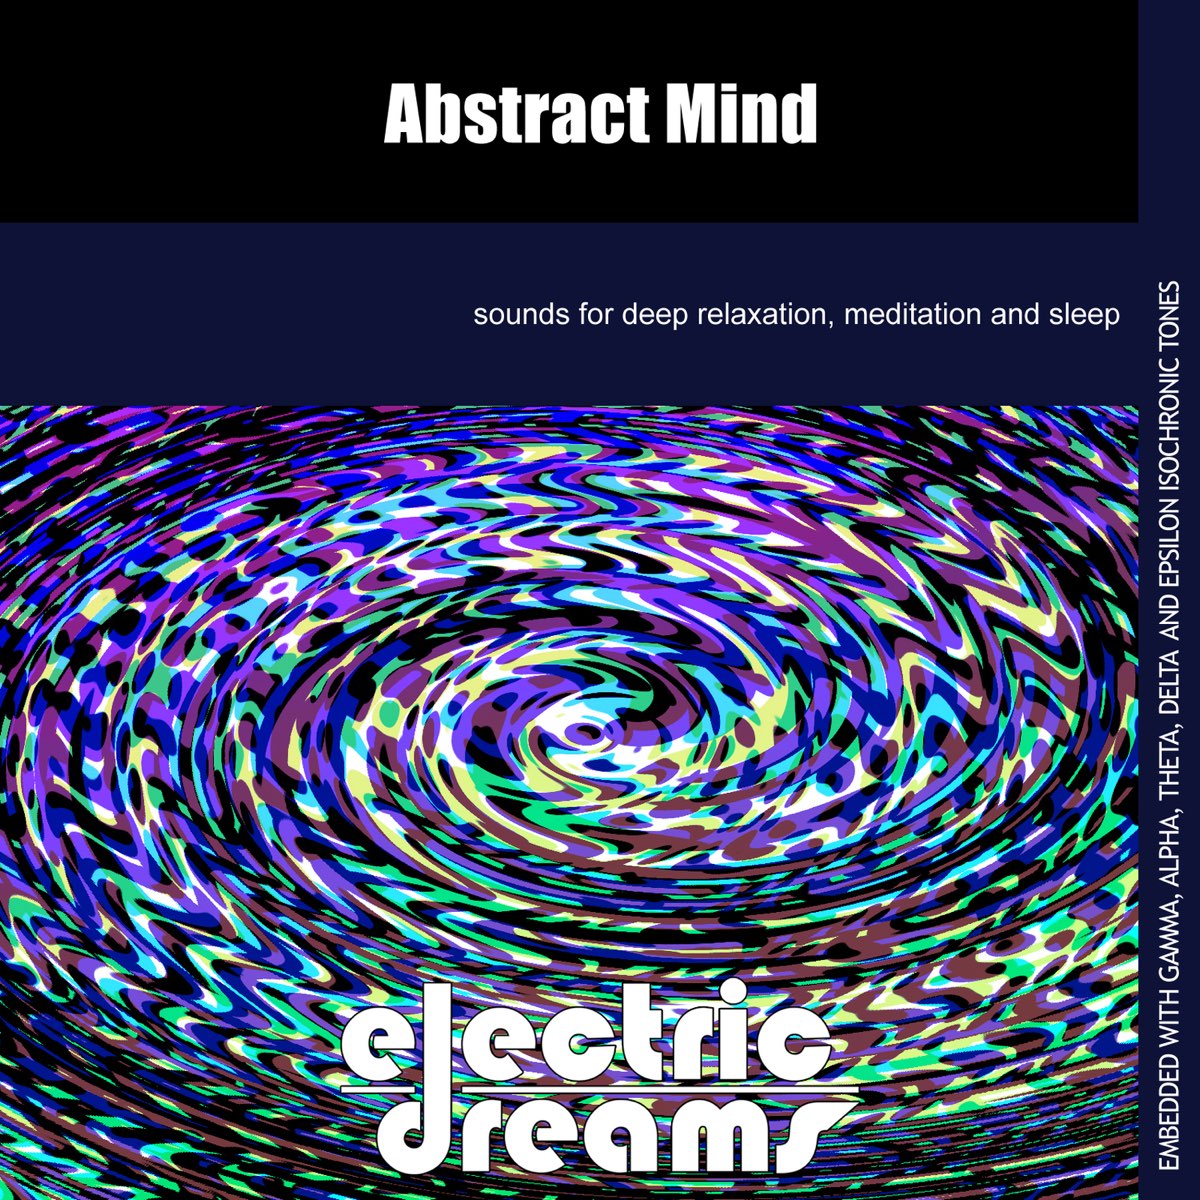 Demo 4 edit mind electric. The Mind Electric. The Mind Electric album. The Mind Electric Miracle обложка. The Mind Electric обложка песни.